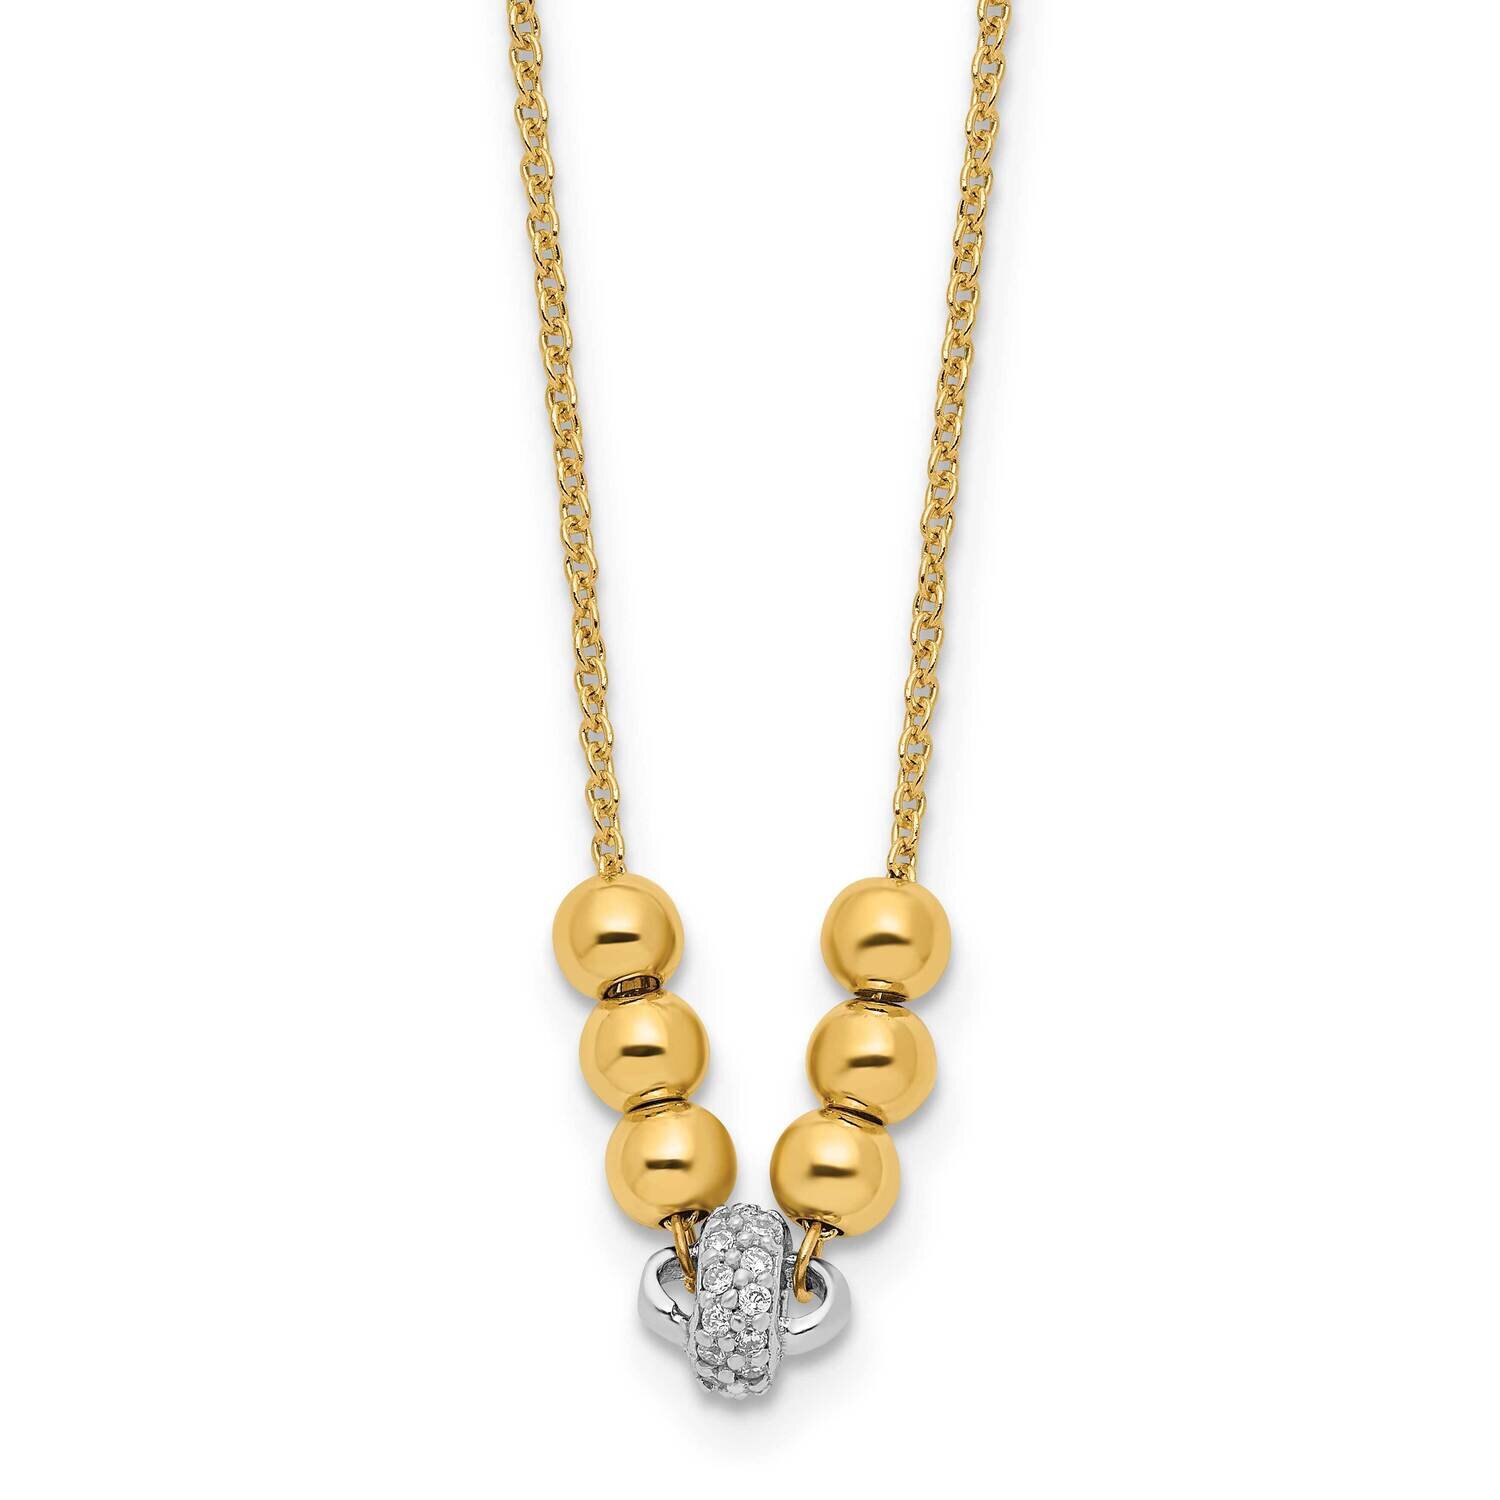 Beads & CZ Diamond with 1.5 In Extender Necklace 19.5 Inch 14k Two-Tone Gold Polished SF2861-18